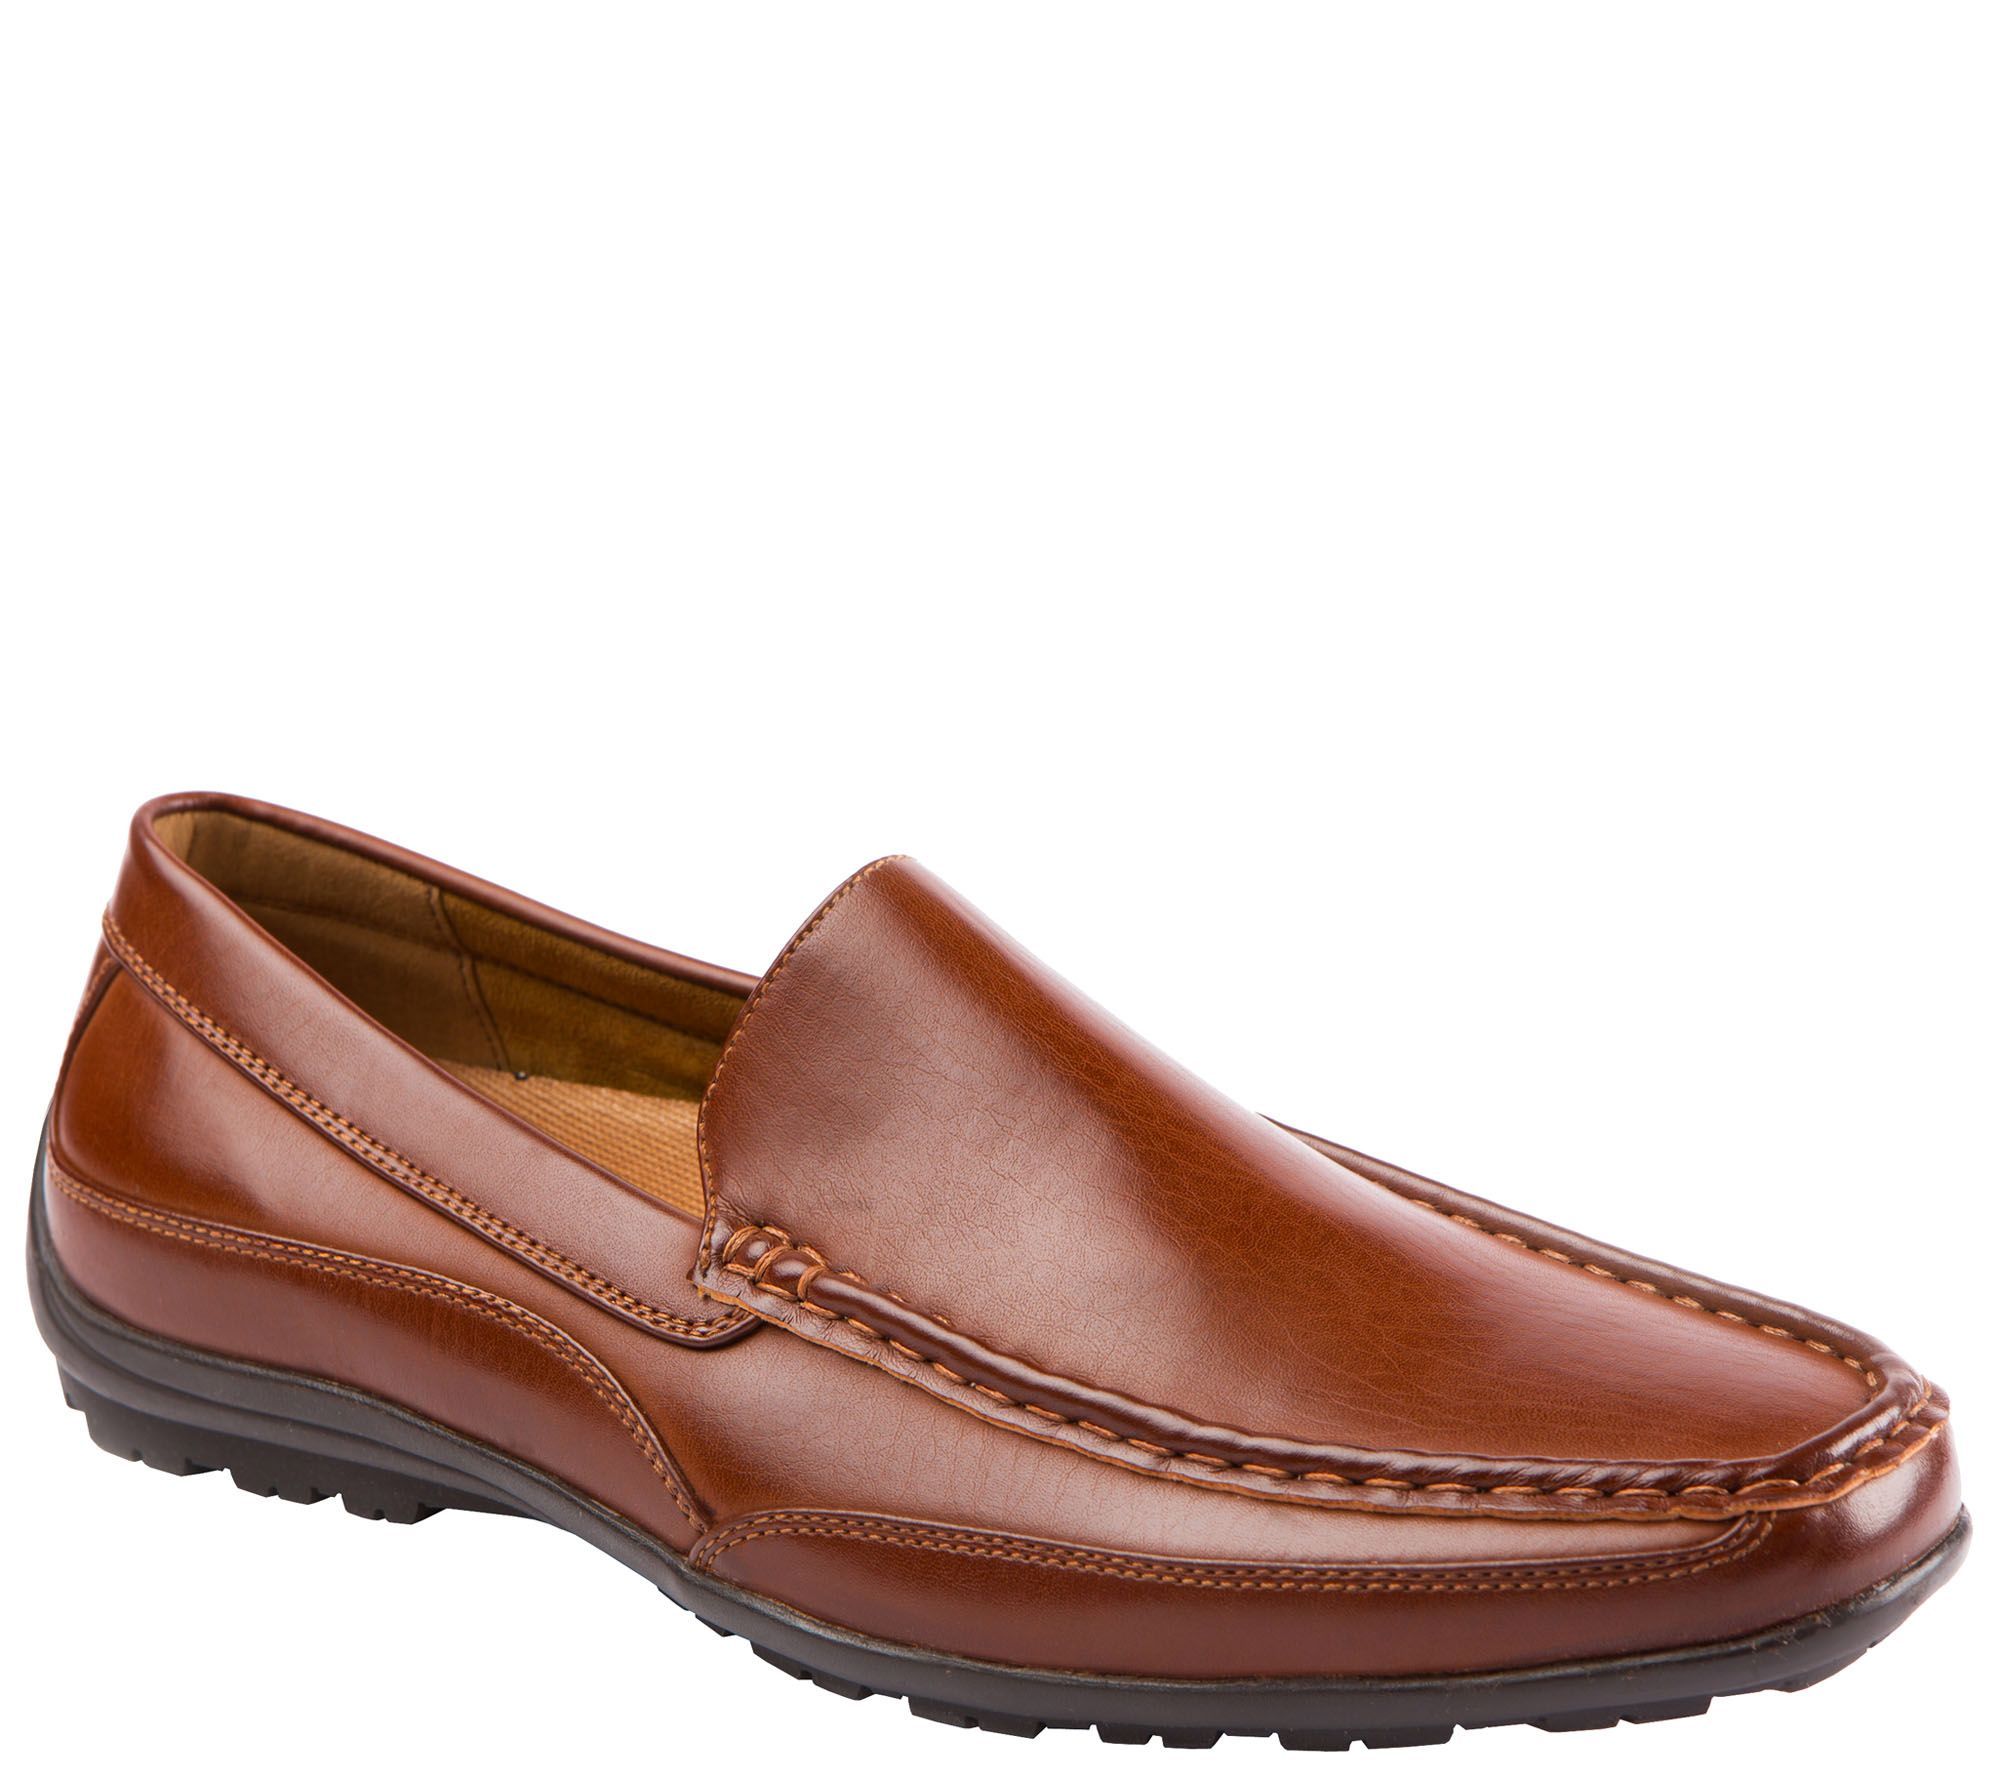 Deer Stags Men's 902 Loafers - Drive - QVC.com